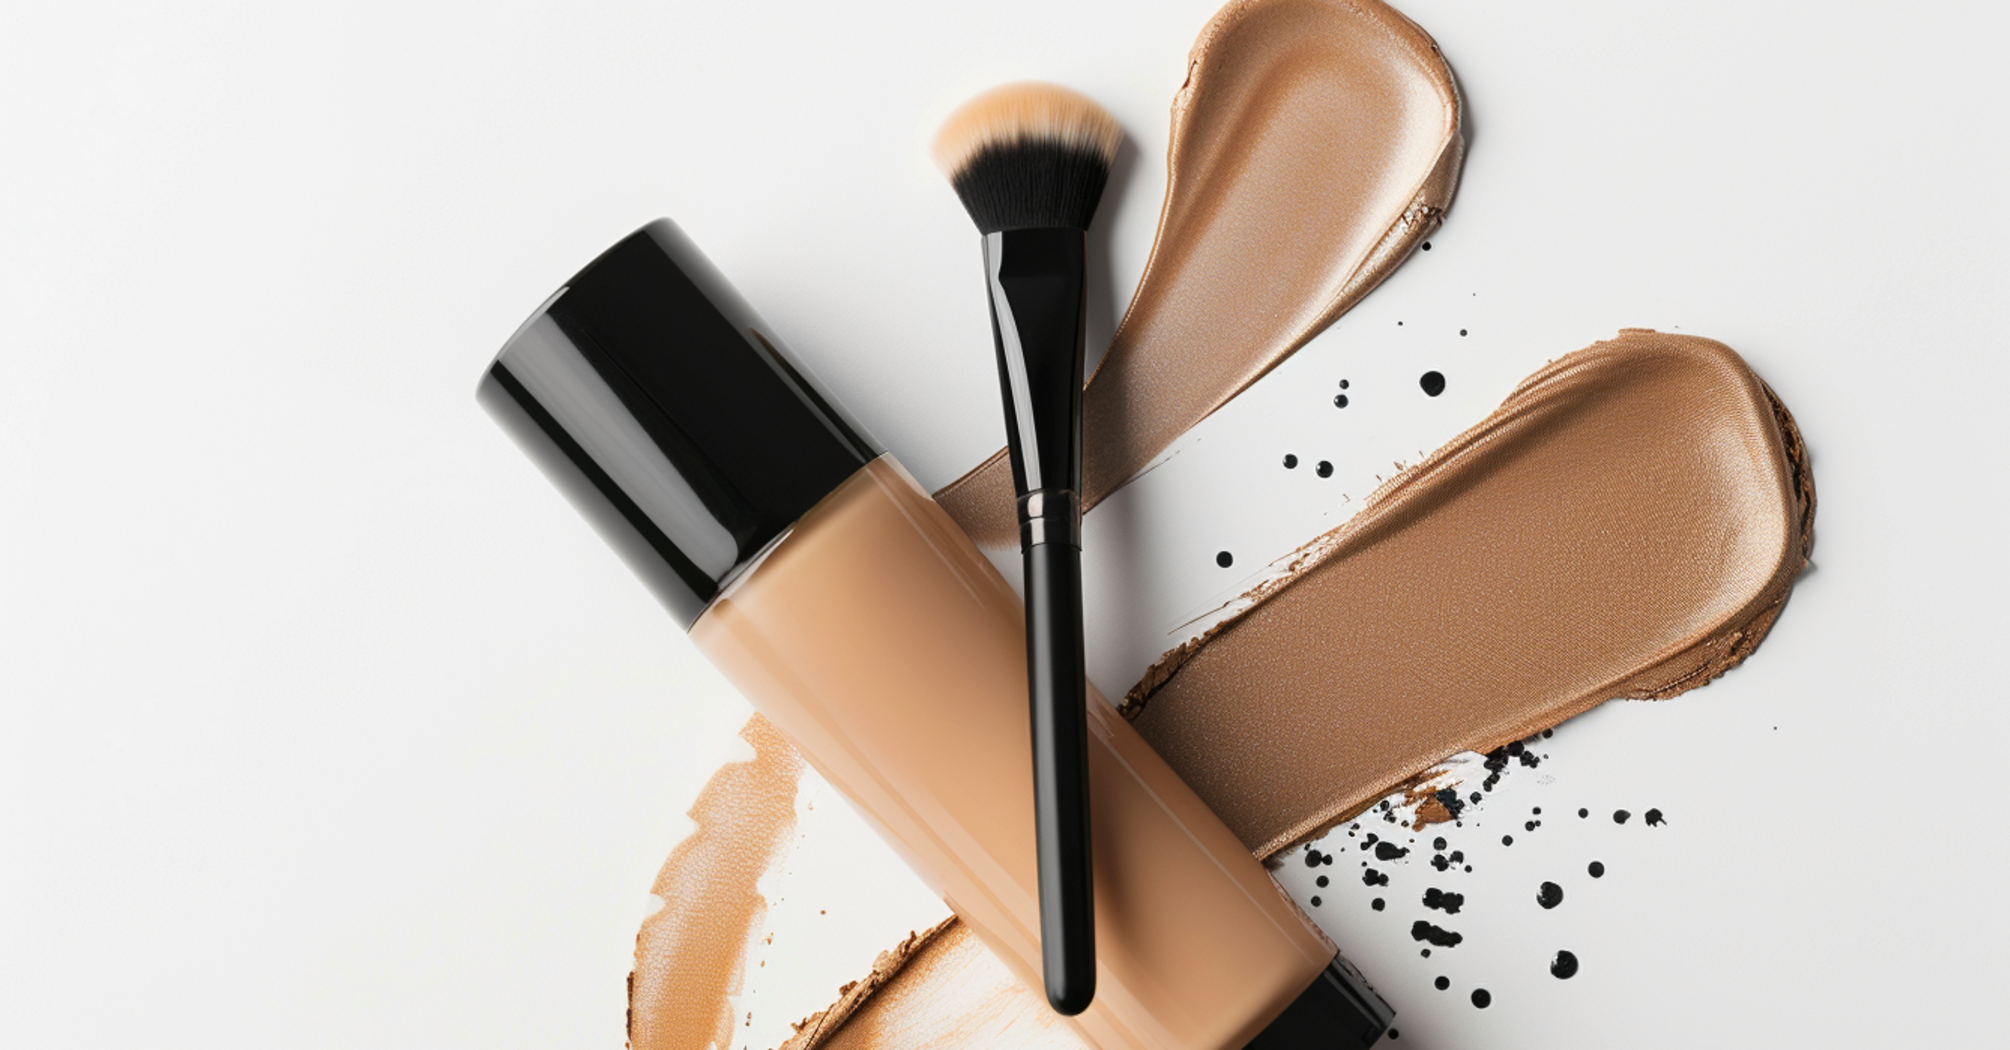 Secrets of perfect coverage: how to apply foundation correctly